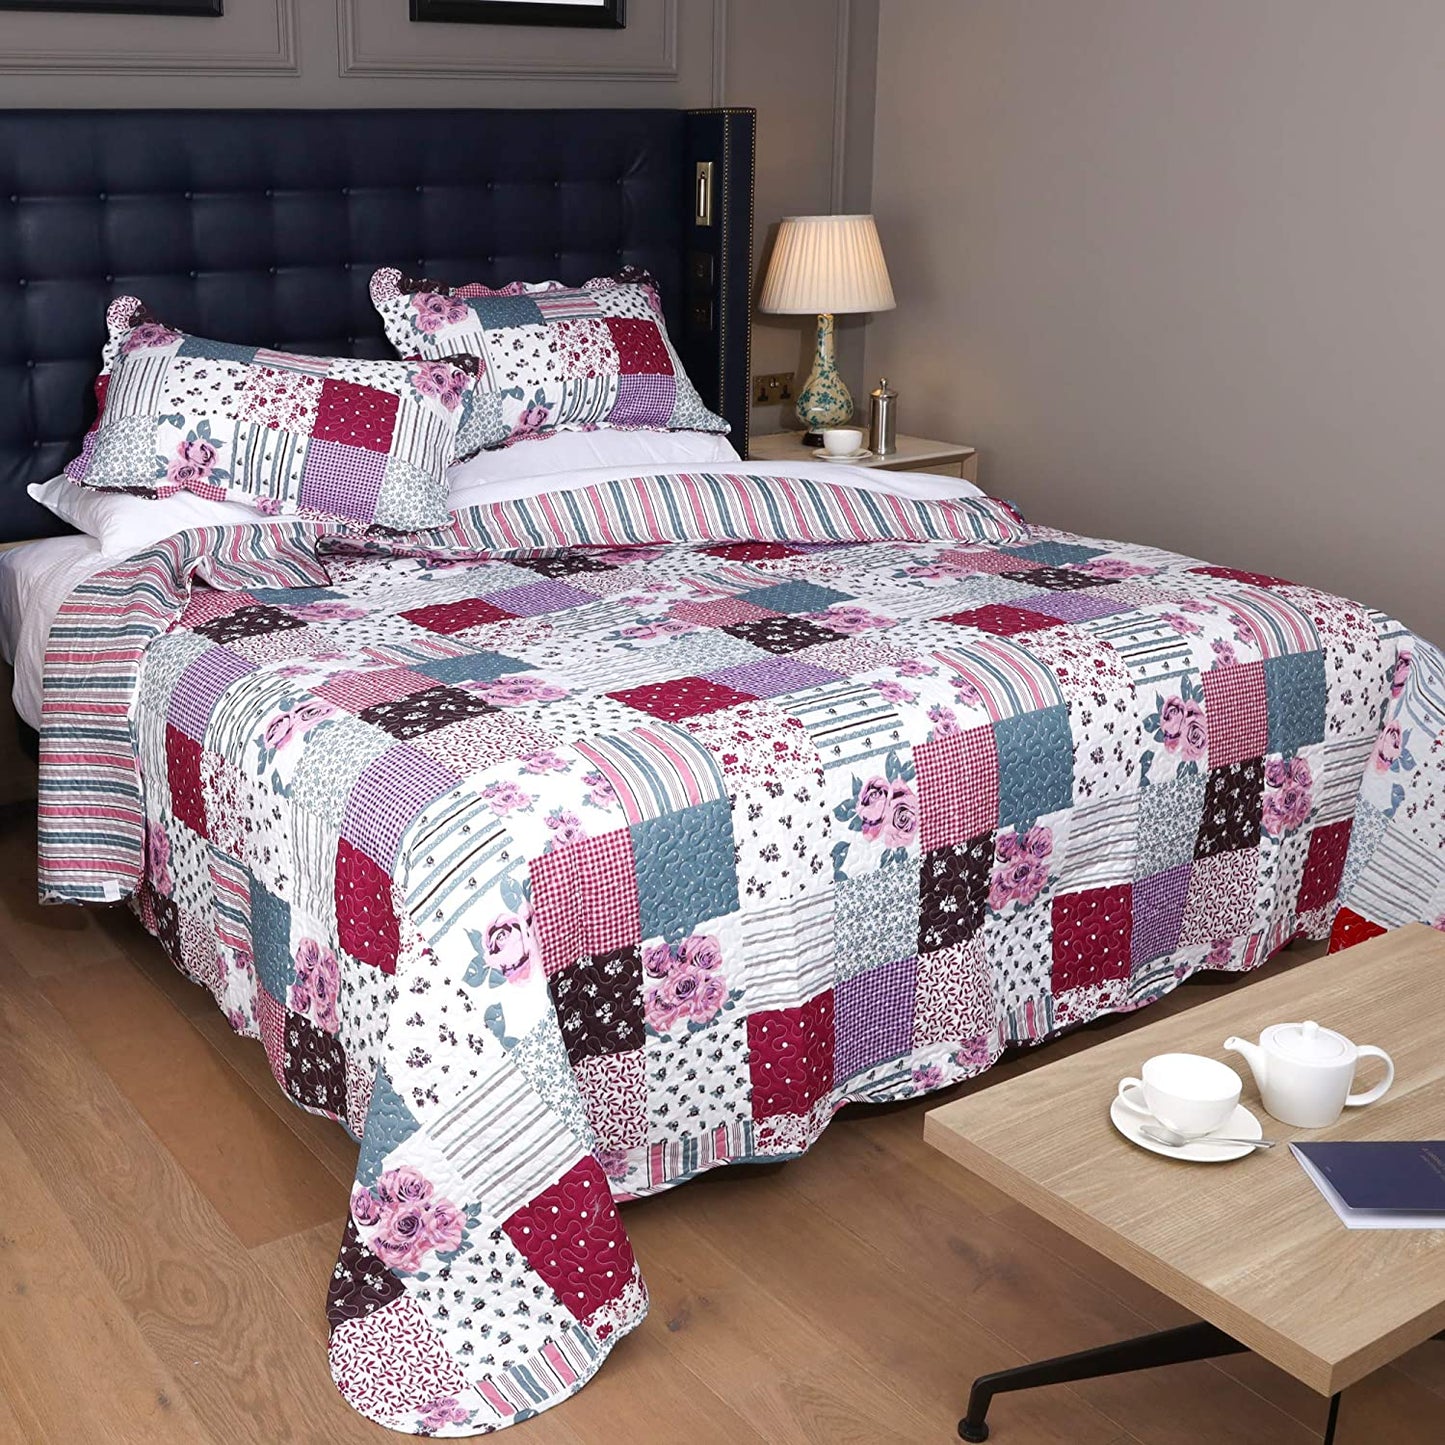 King Size Quilted Bedspread And Pillowshams Throw Over Freya Purple Patchwork 260cm x 260cm